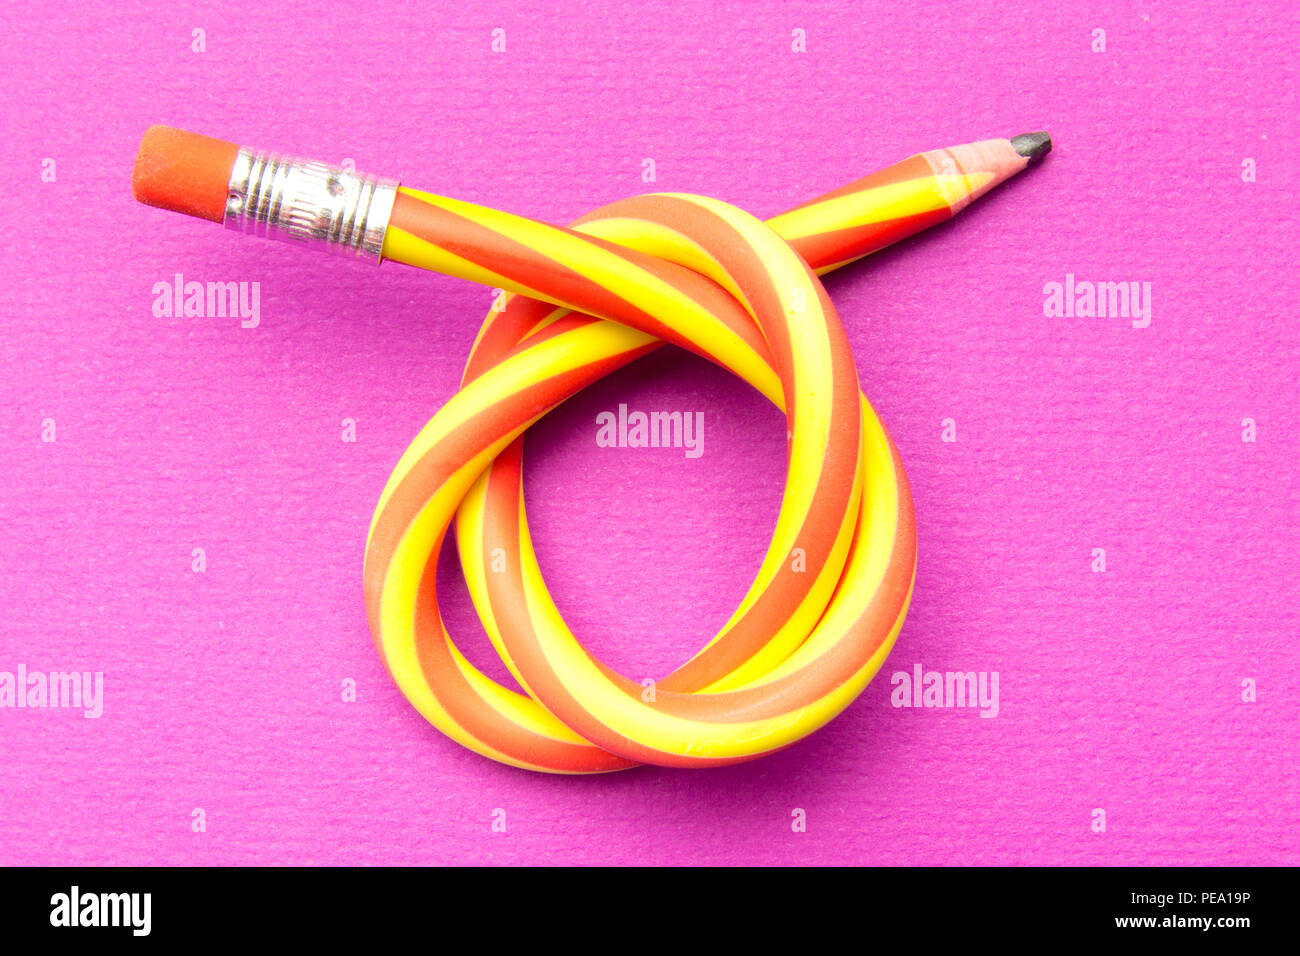 Flexible pencil on a textured cardboard background. Bent pencils two-color  Stock Photo - Alamy